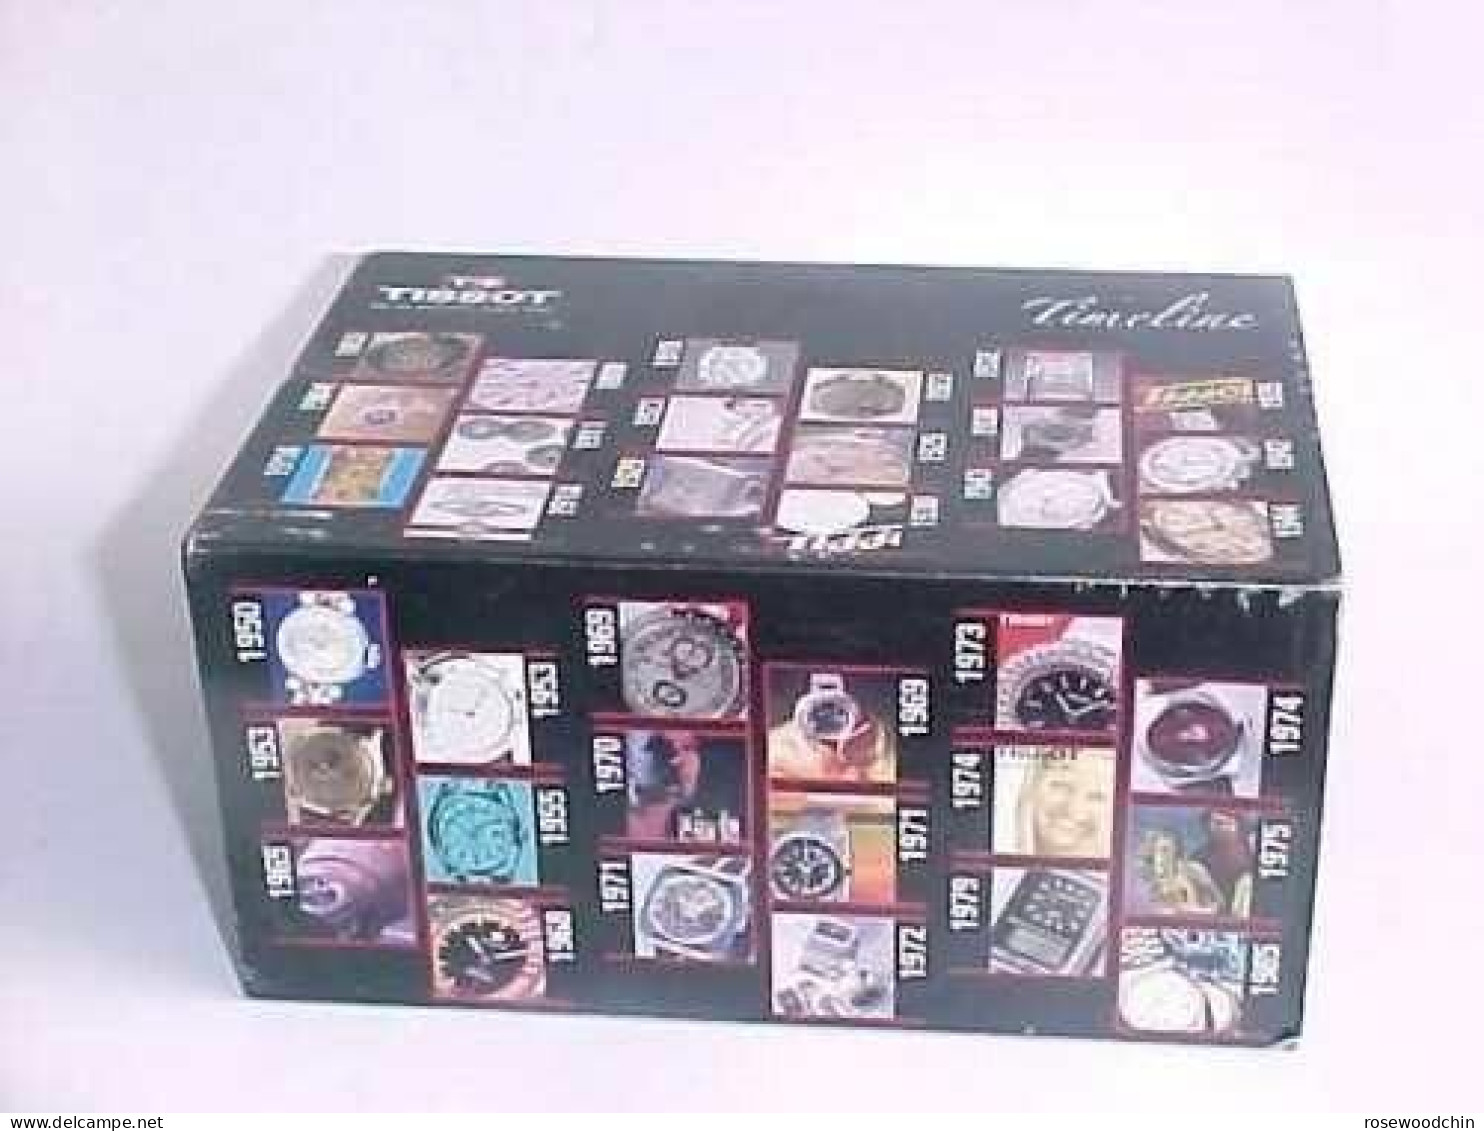 Vintage ! Tissot Swiss Watch Box complete set with Manuals catalogs brochures (No Watch)